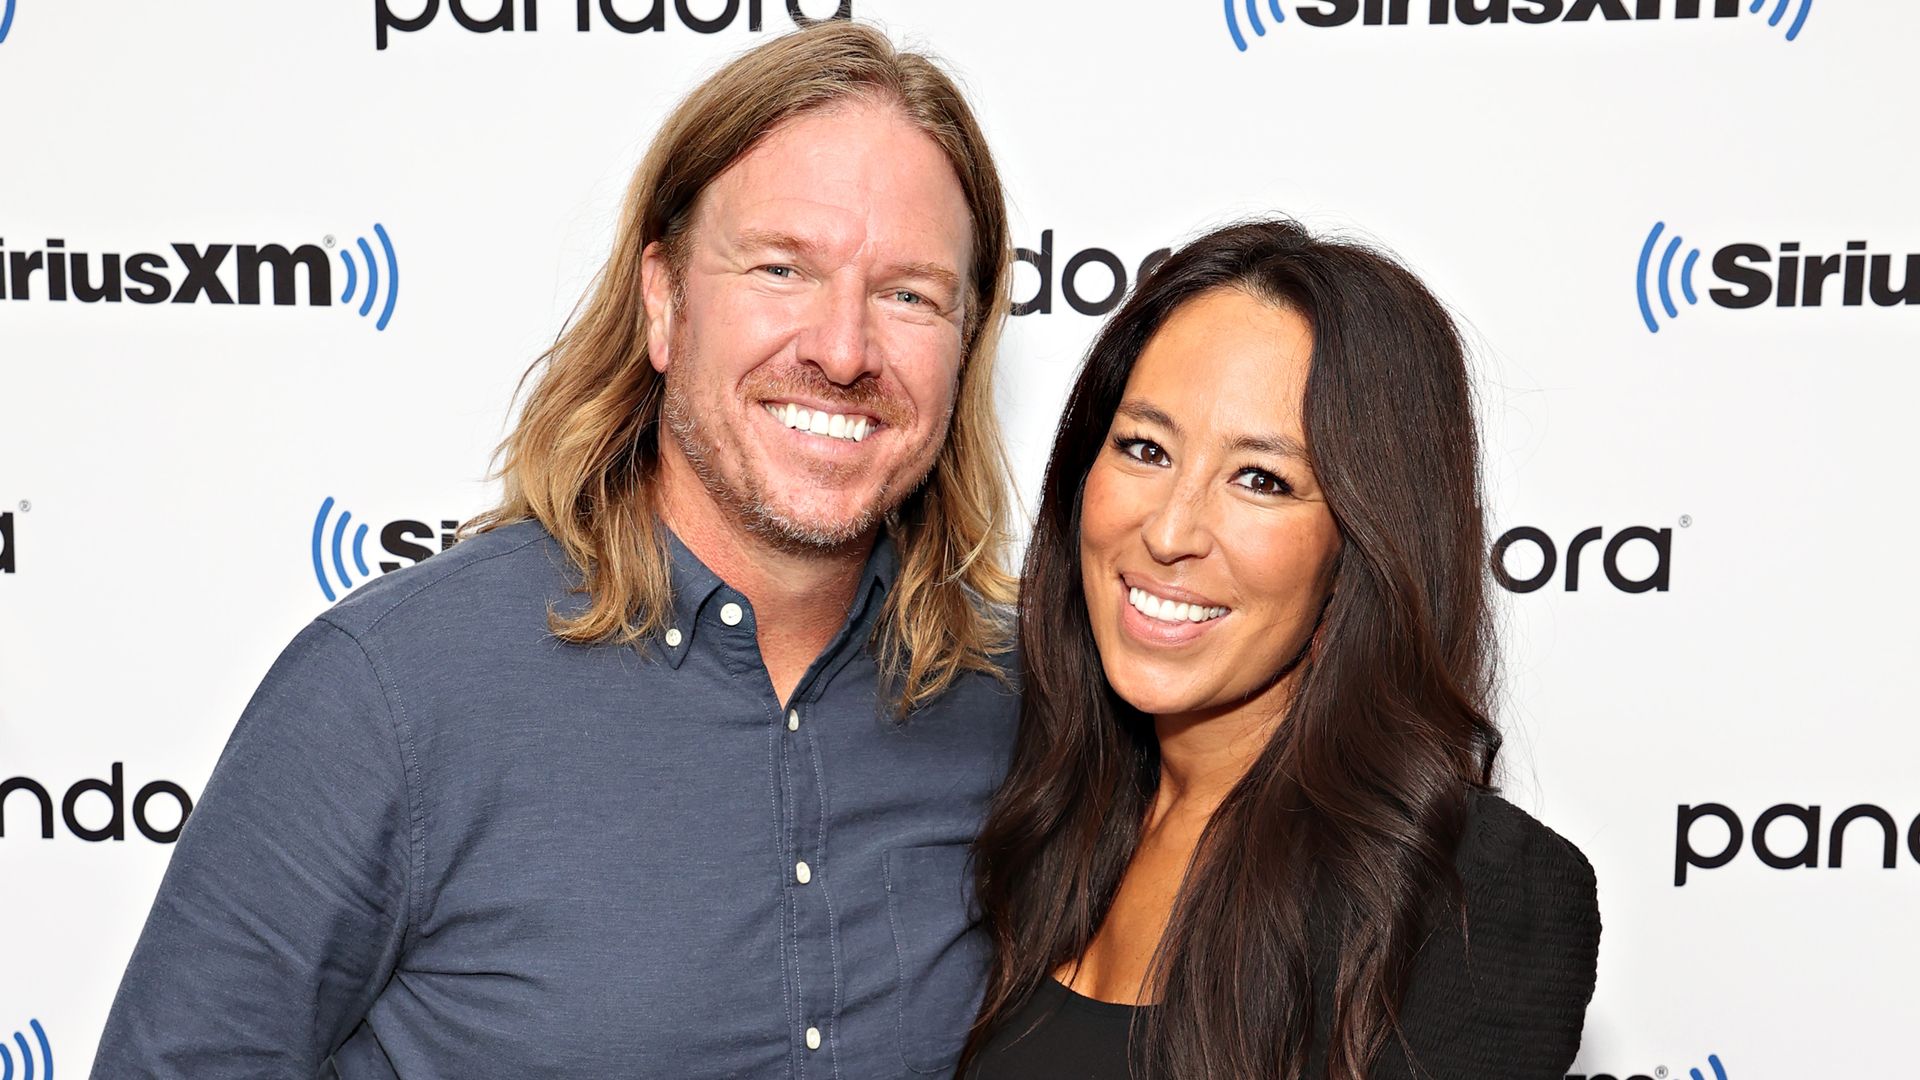 Chip Gaines and Joanna Gaines visit the SiriusXM Studios on July 14, 2021 in New York City